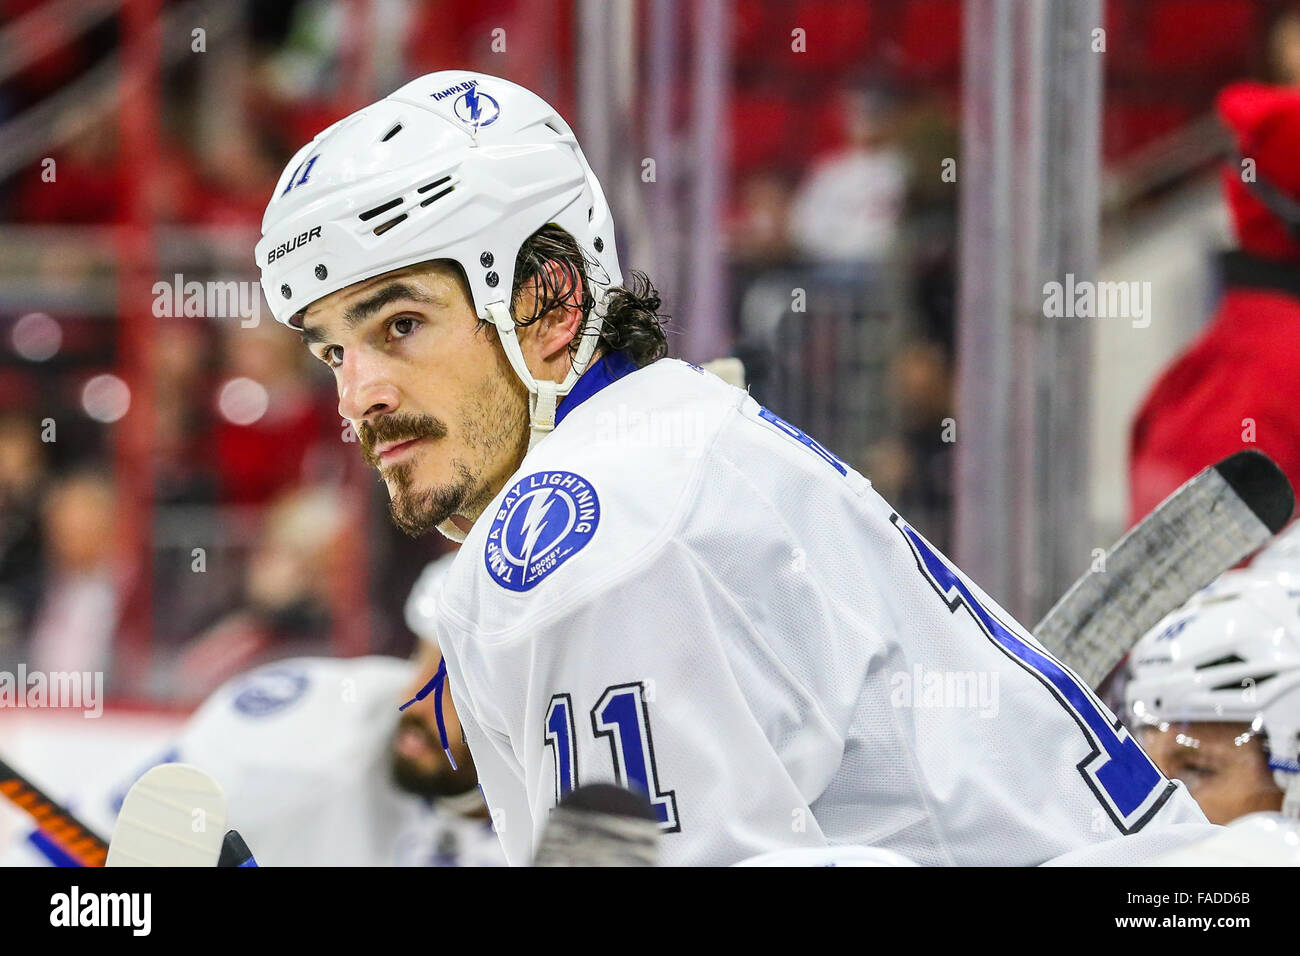 NHL makes right call not to suspend Lightning's Brian Boyle (w/ video)